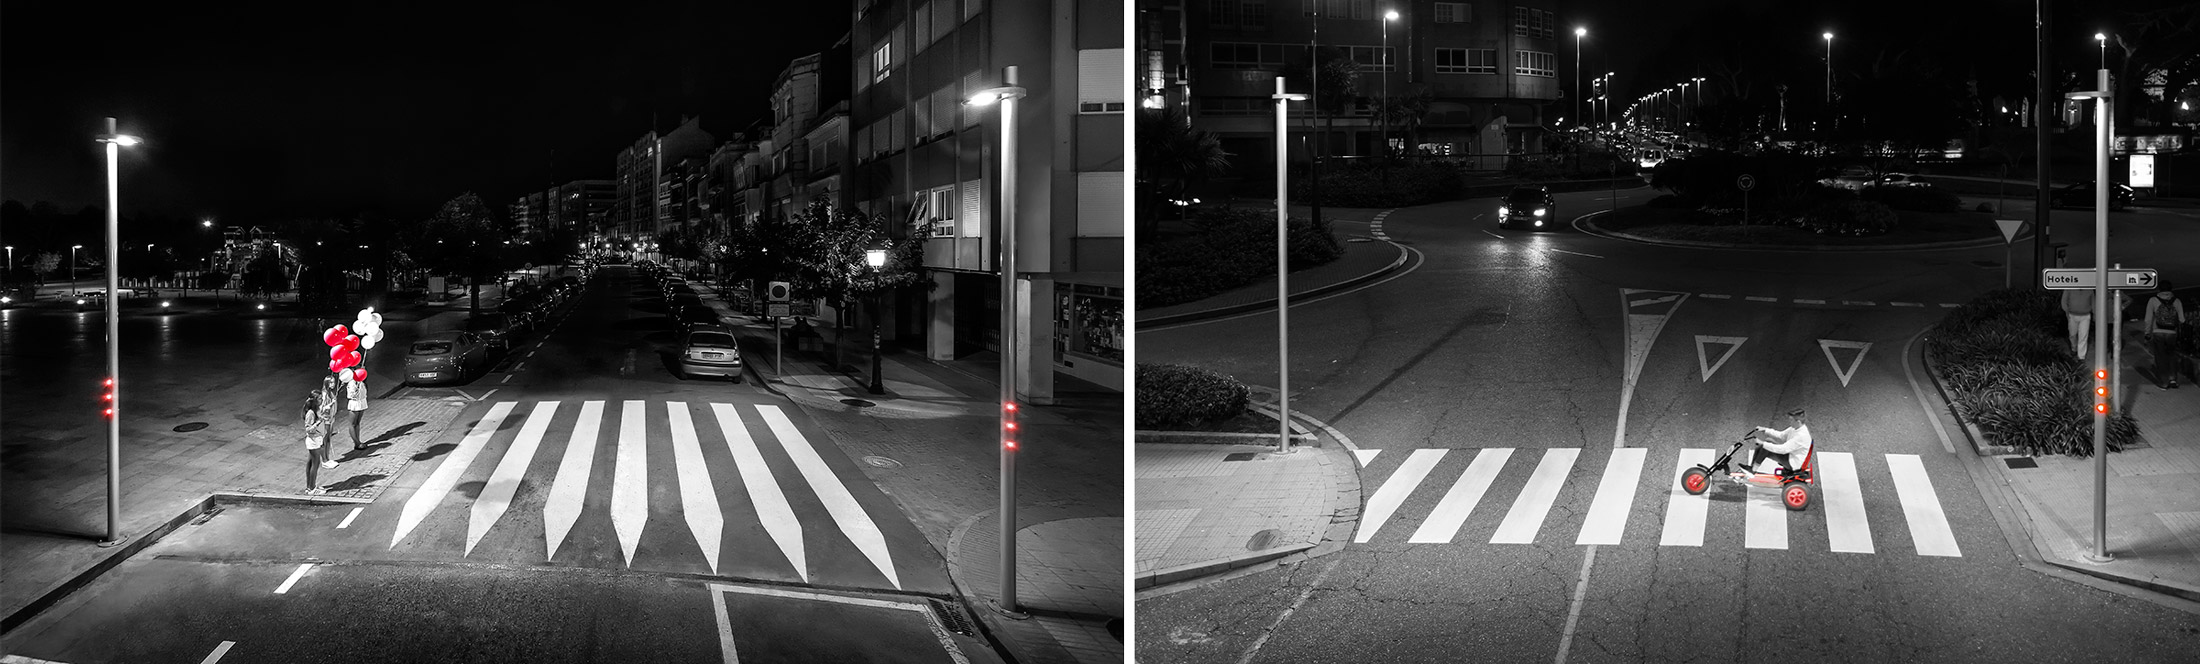 Interactive light to protect lives on crosswalks